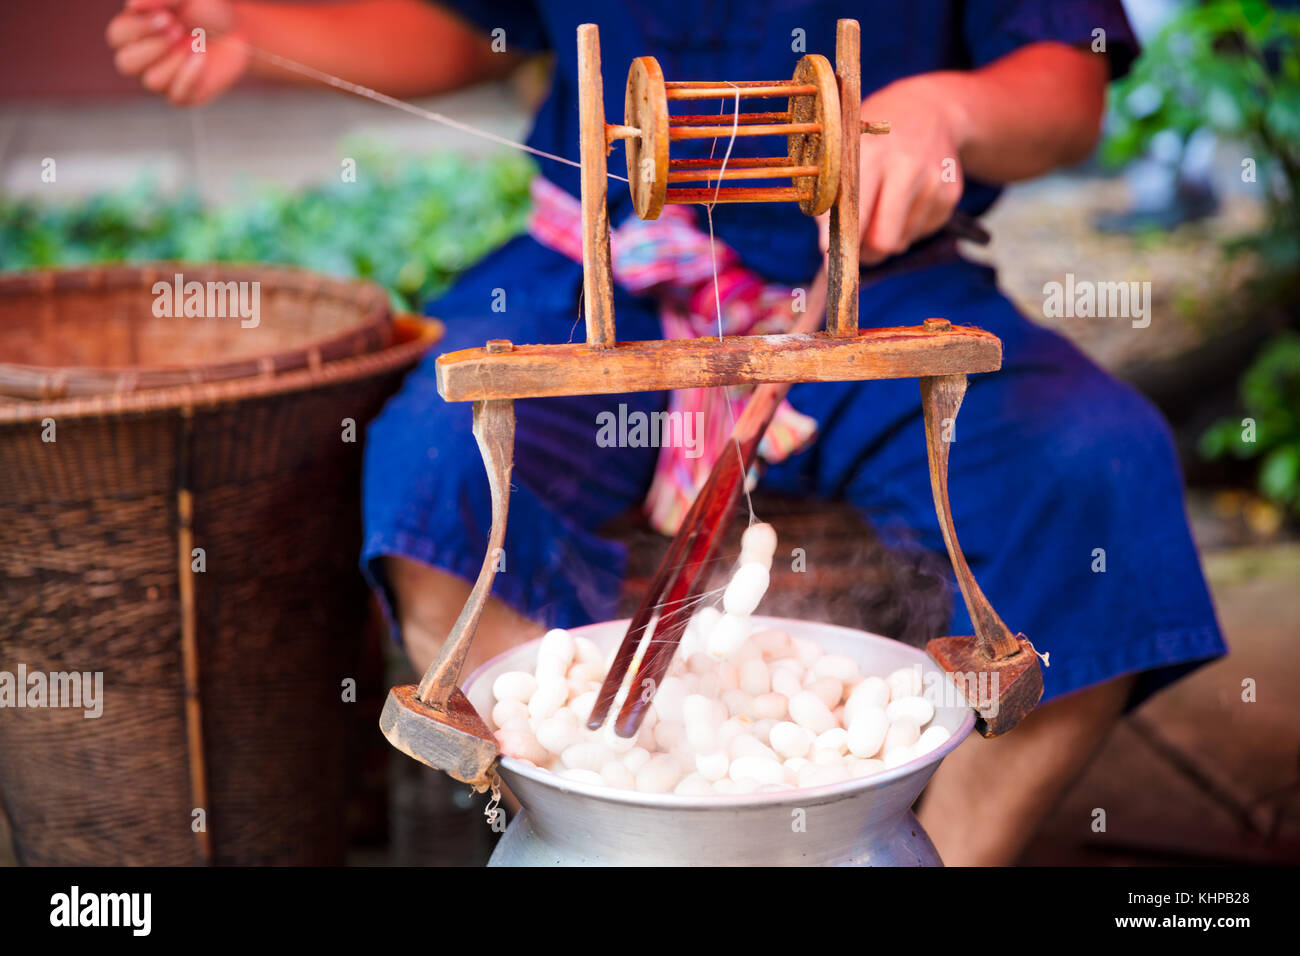 Man Unwinding And Reeling Silk Cocoons In Factory Stock Photo